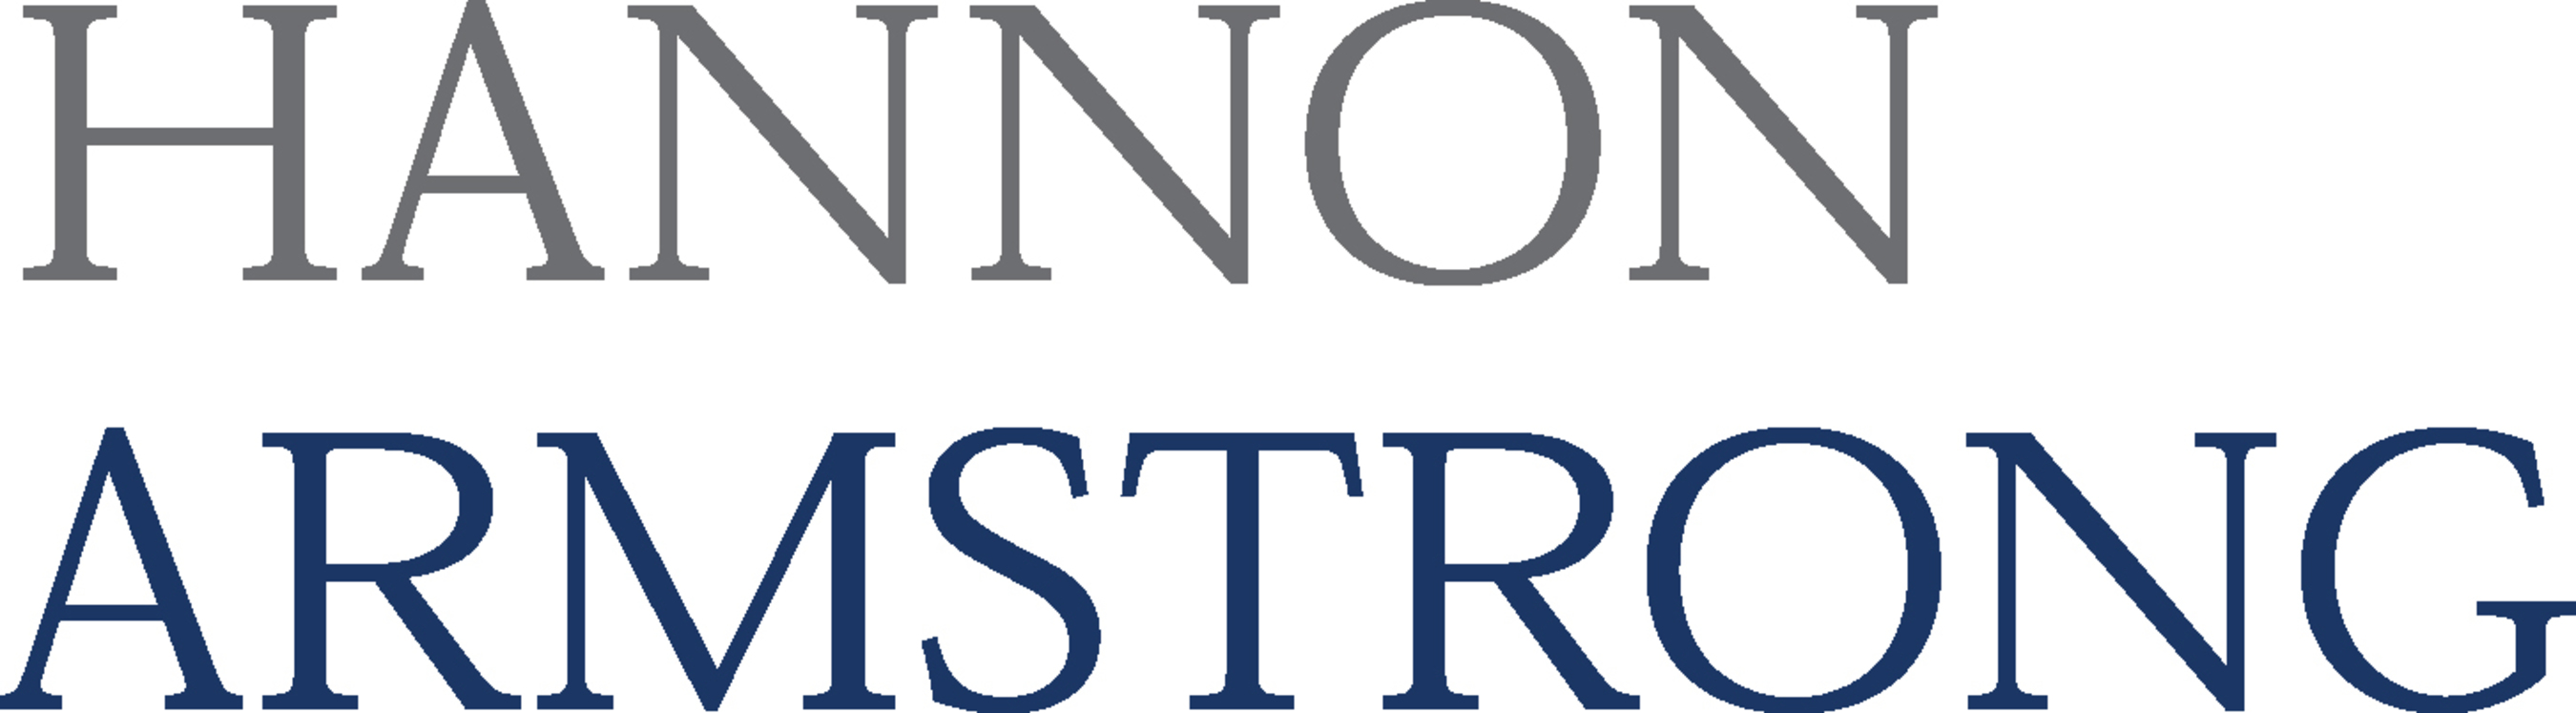 Hannon Armstrong Sustainable Infrastructure Logo.